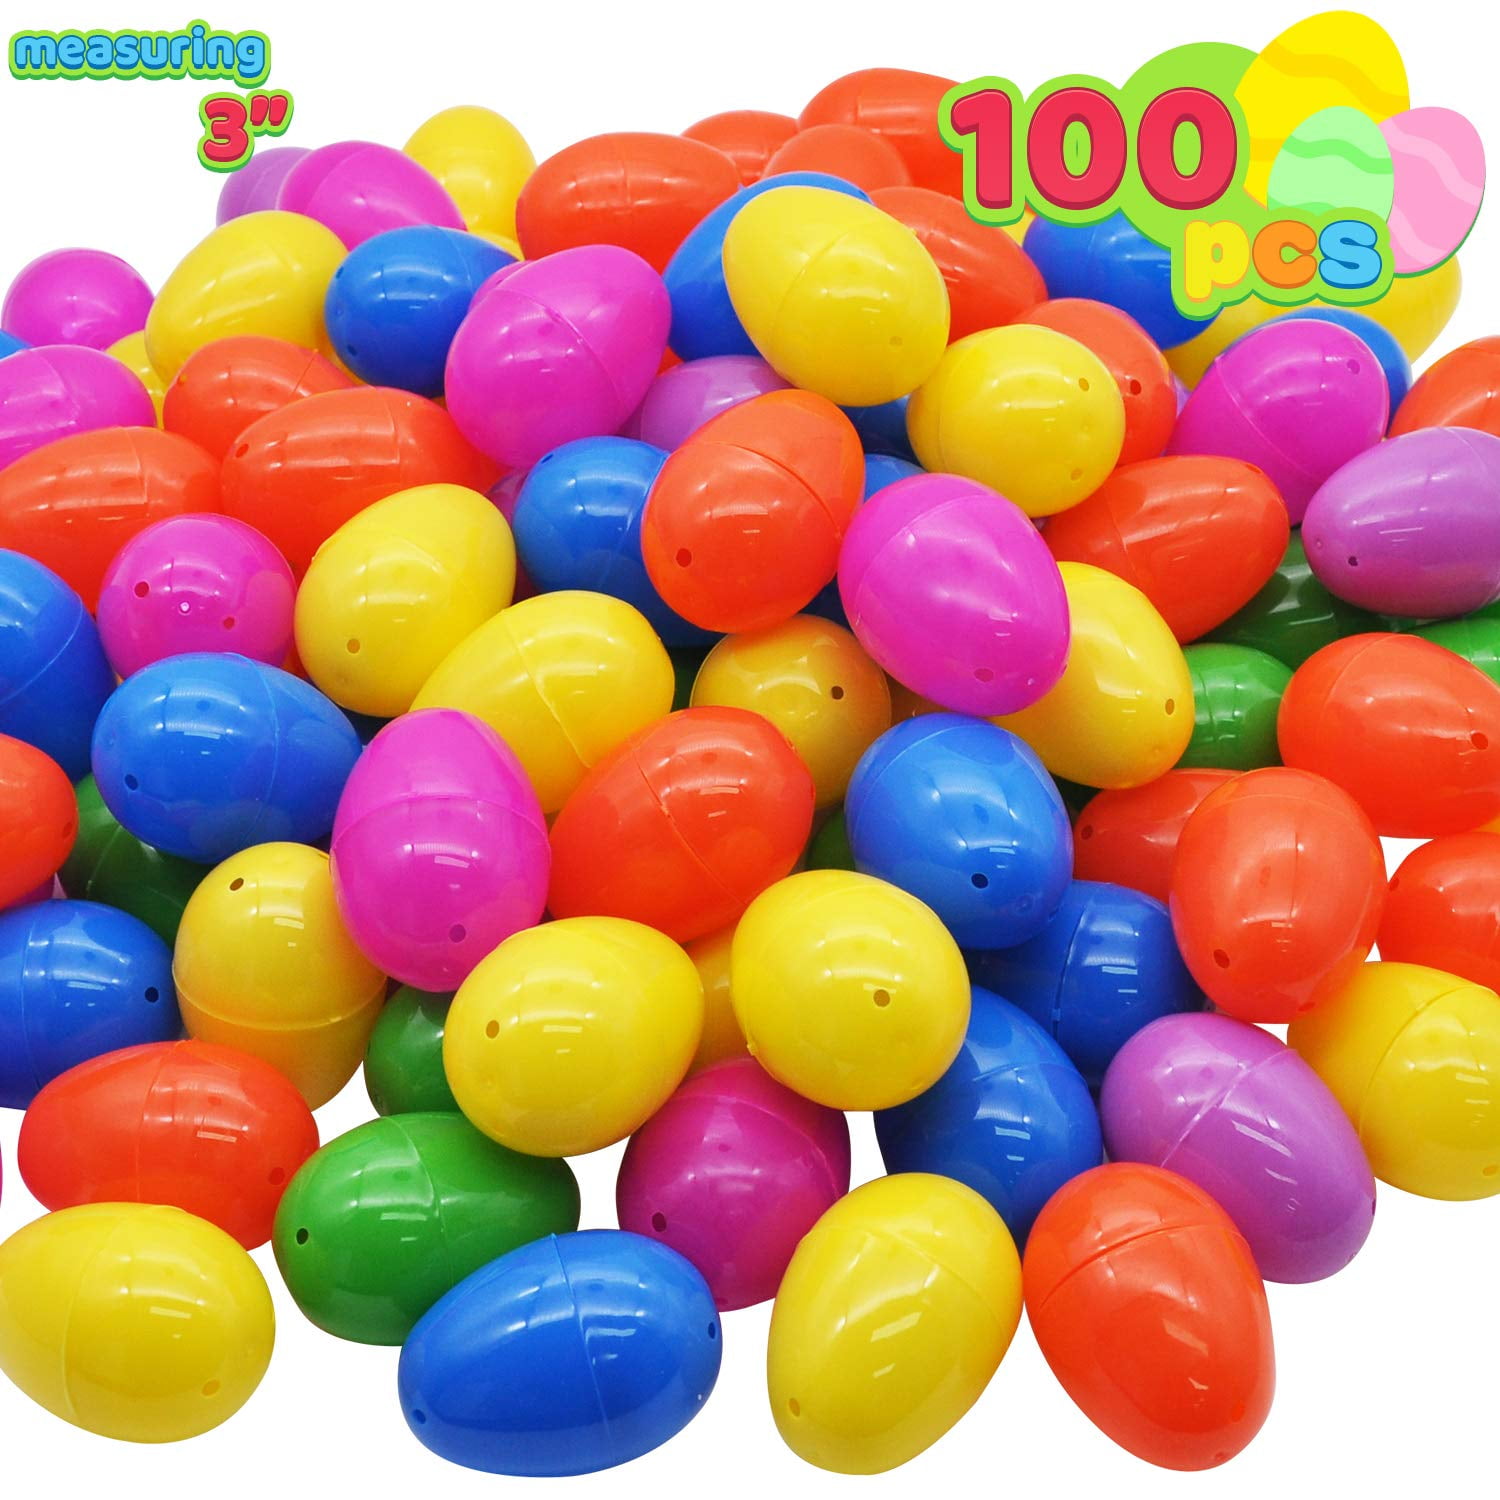 Party Favor Easter Basket Stuffers//Fillers JOYIN 12 Pcs Prefilled Easter Eggs with Space Ship Building Blocks for Easter Eggs Hunt Classroom Prize Supplies